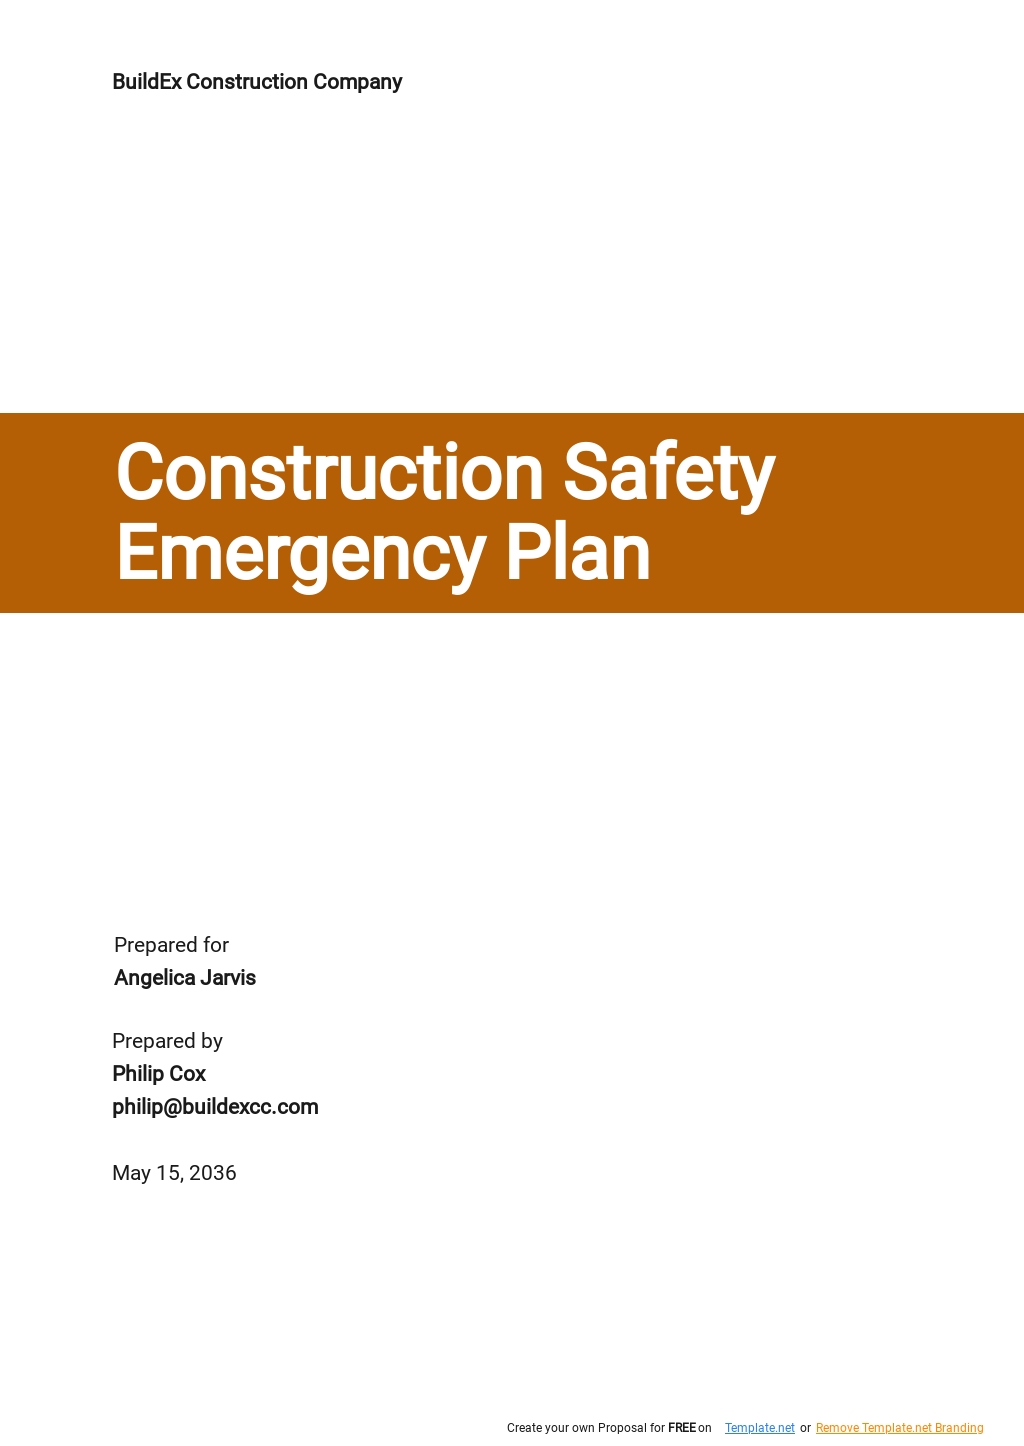 Construction Safety Emergency Plan Template.jpe